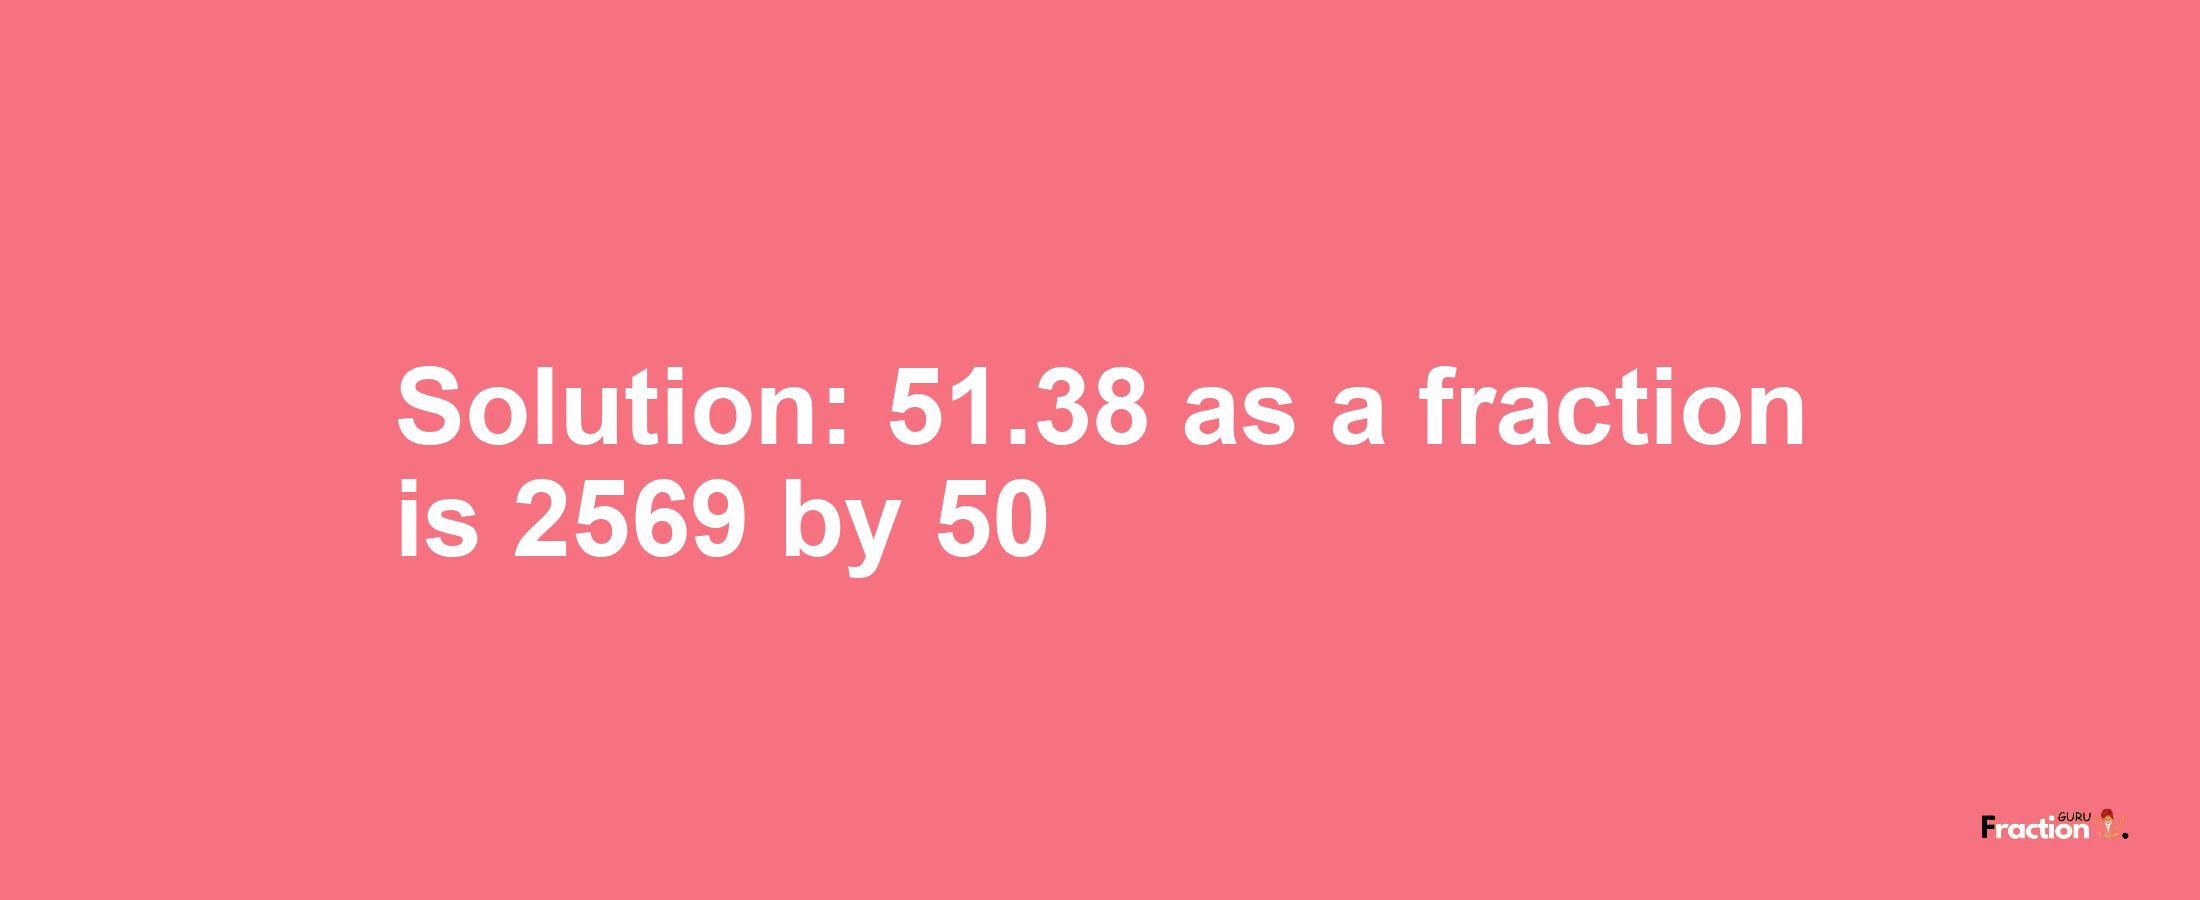 Solution:51.38 as a fraction is 2569/50